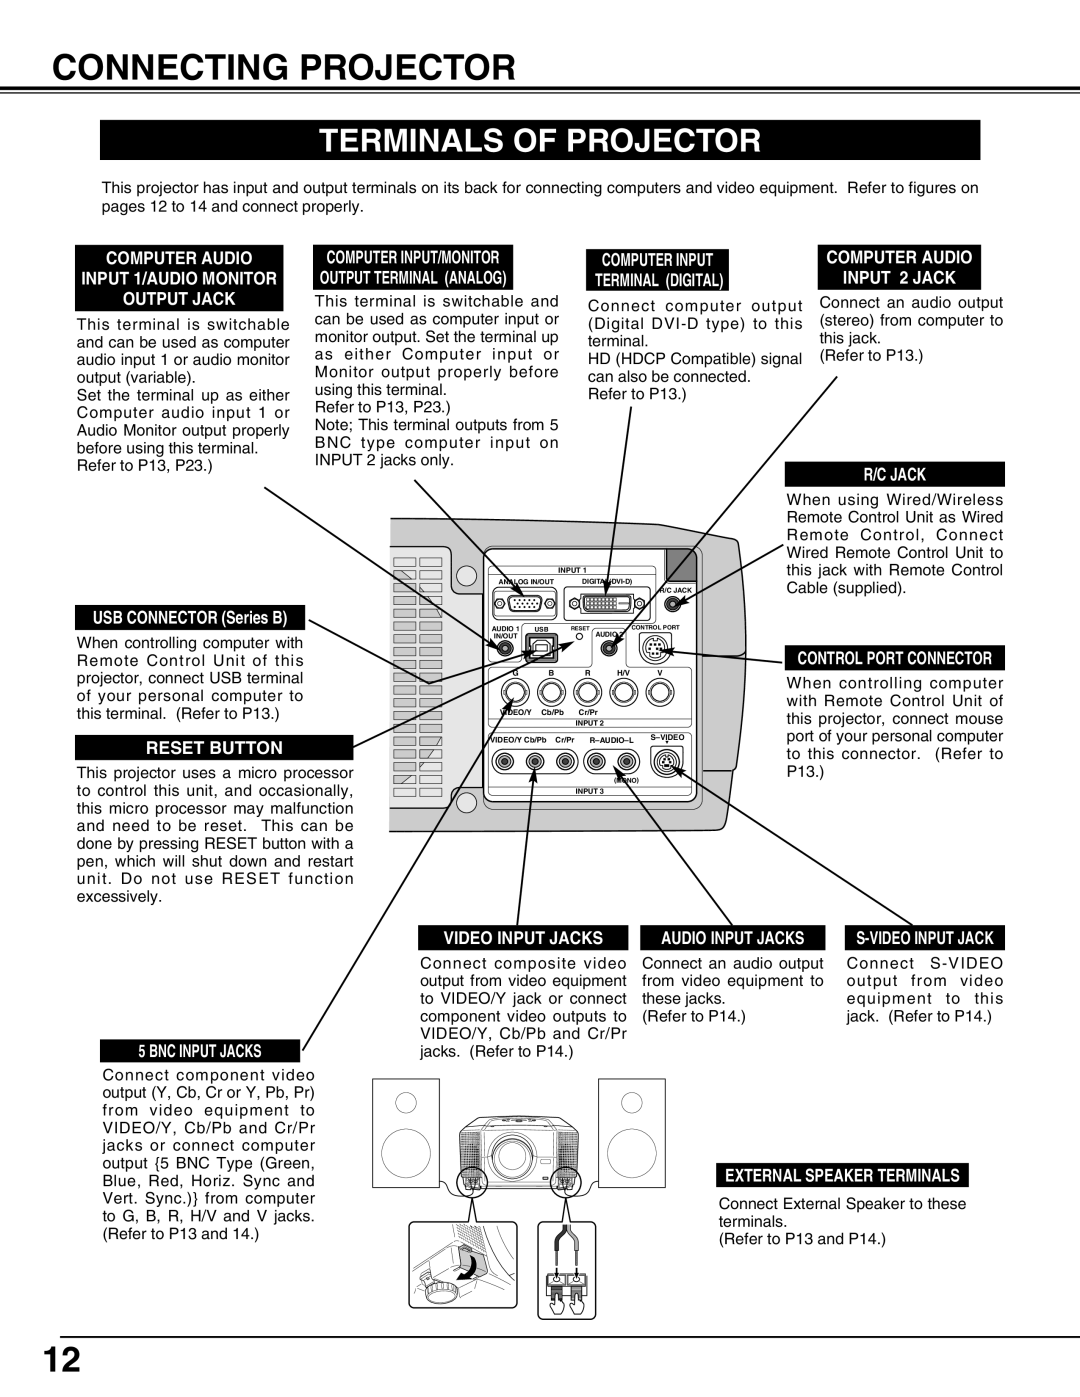 Eiki LC-X70 instruction manual Connecting Projector, Terminals Of Projector 